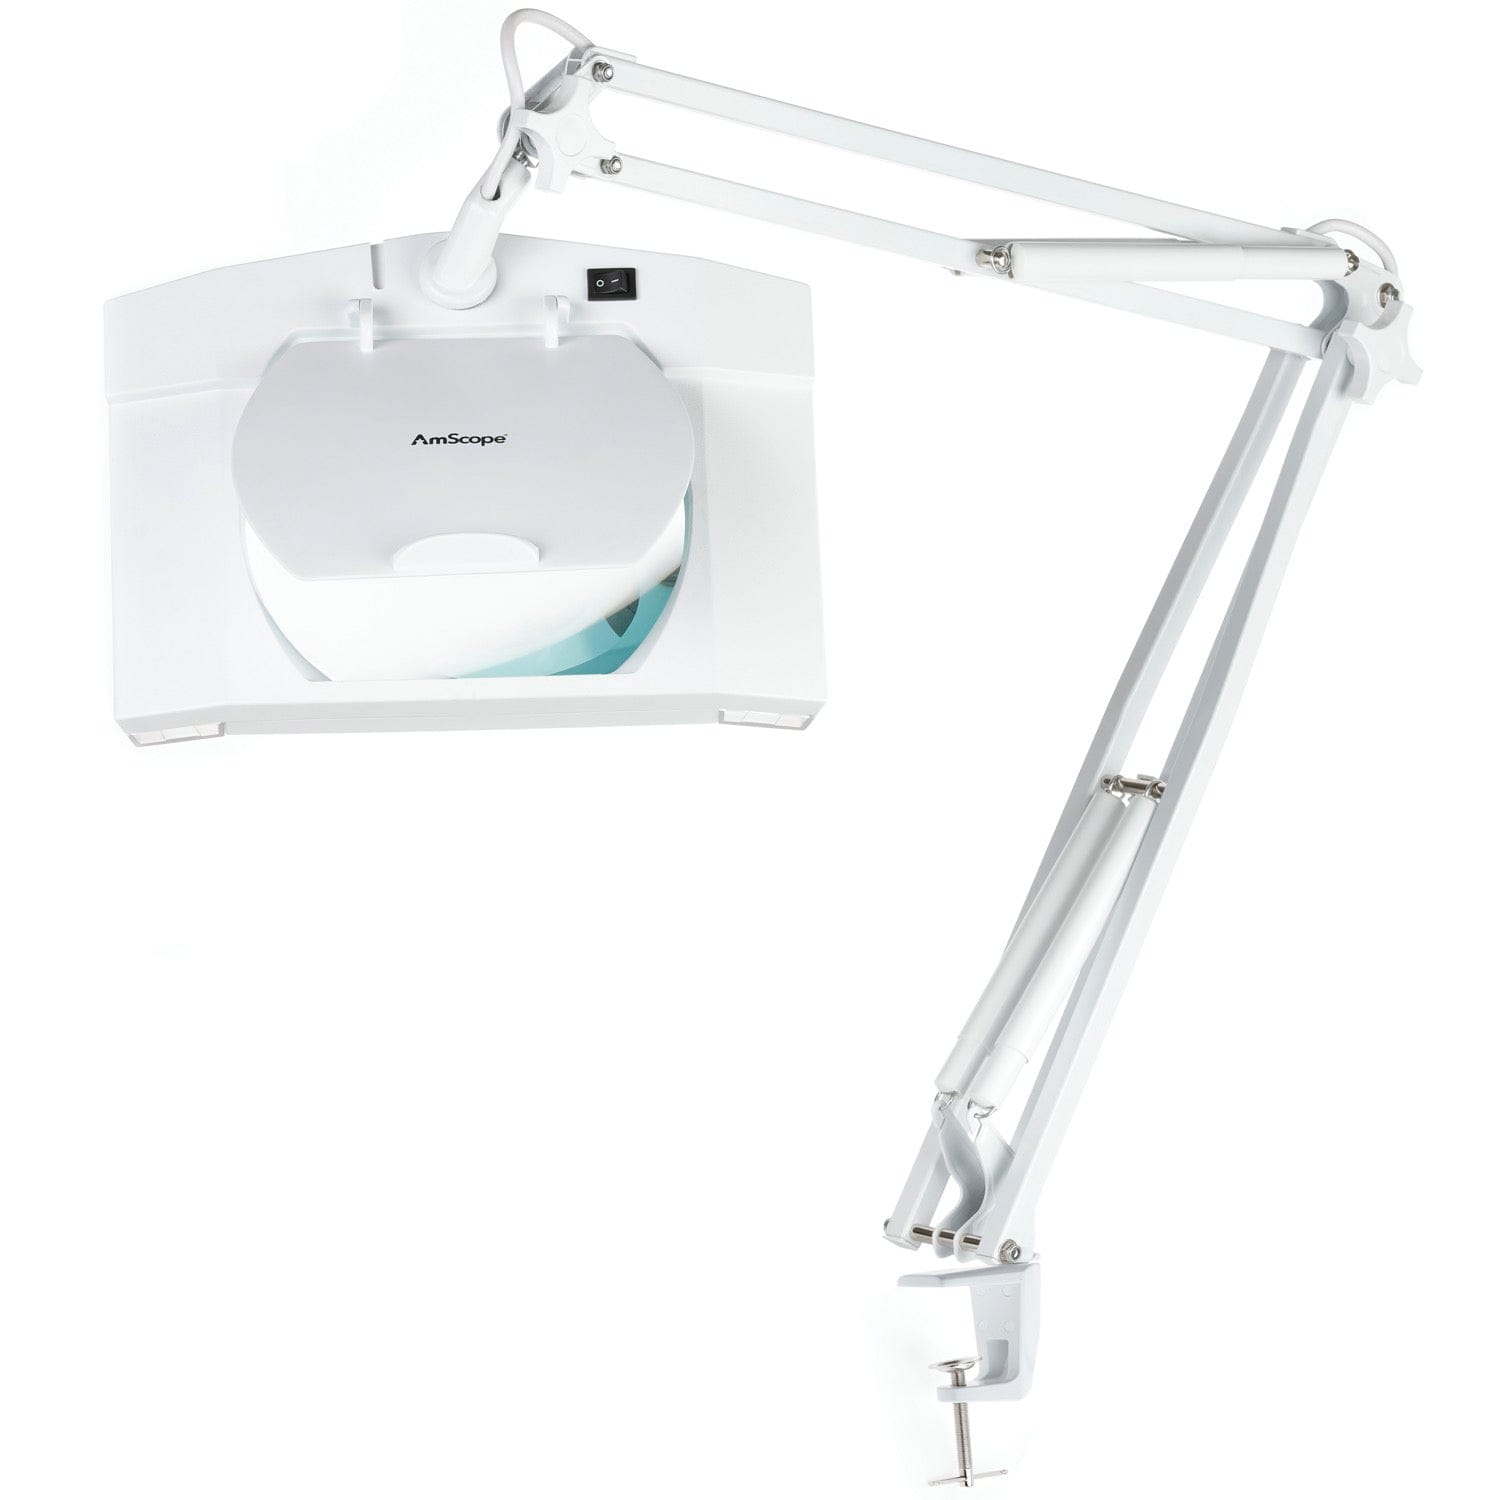 Magnifier lamp - Microscopes - Magnifying glasses - Equipment 